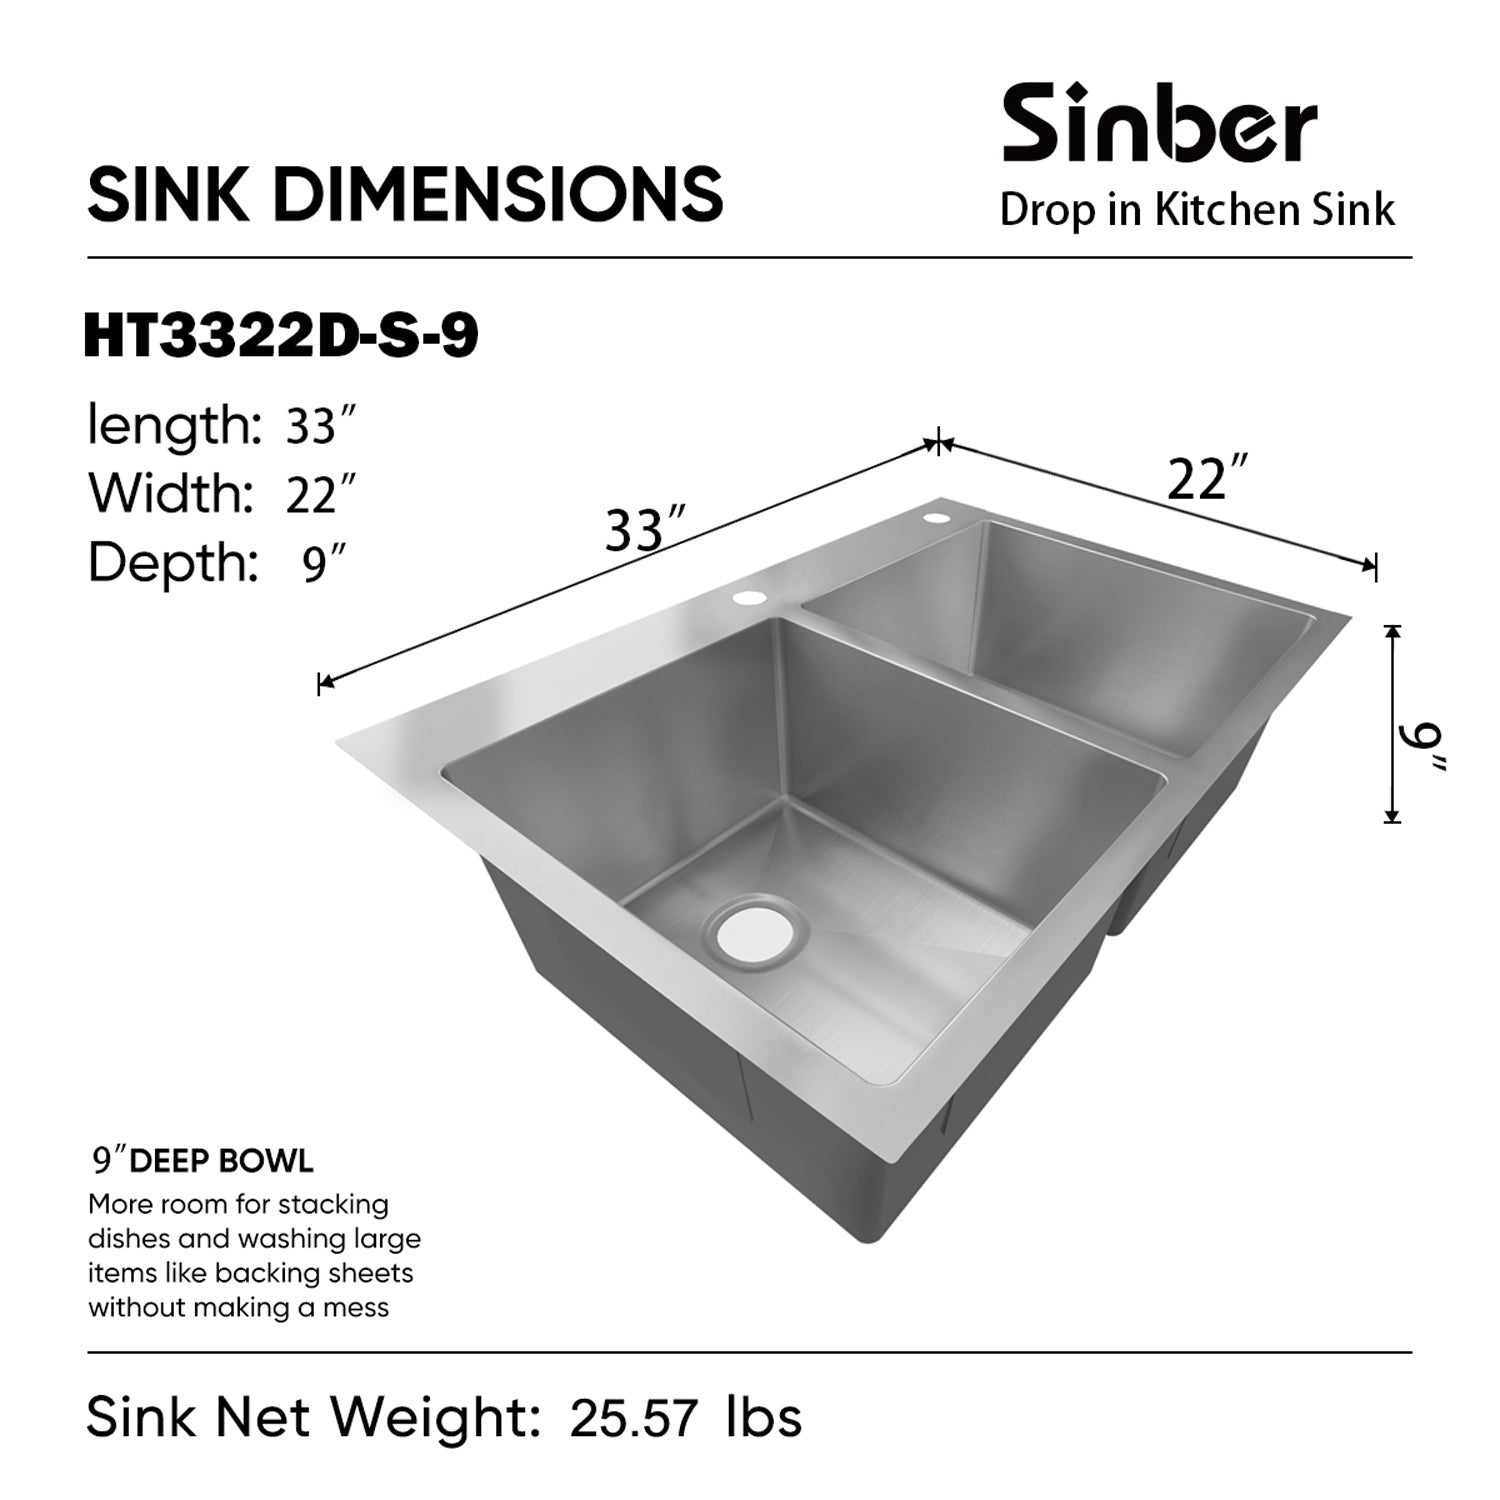 Sinber 33" x 22" x 9" Drop In Double Bowl Kitchen Sink with 18 Gauge 304 Stainless Steel Satin Finish HT3322D-S-9 (Sink Only)